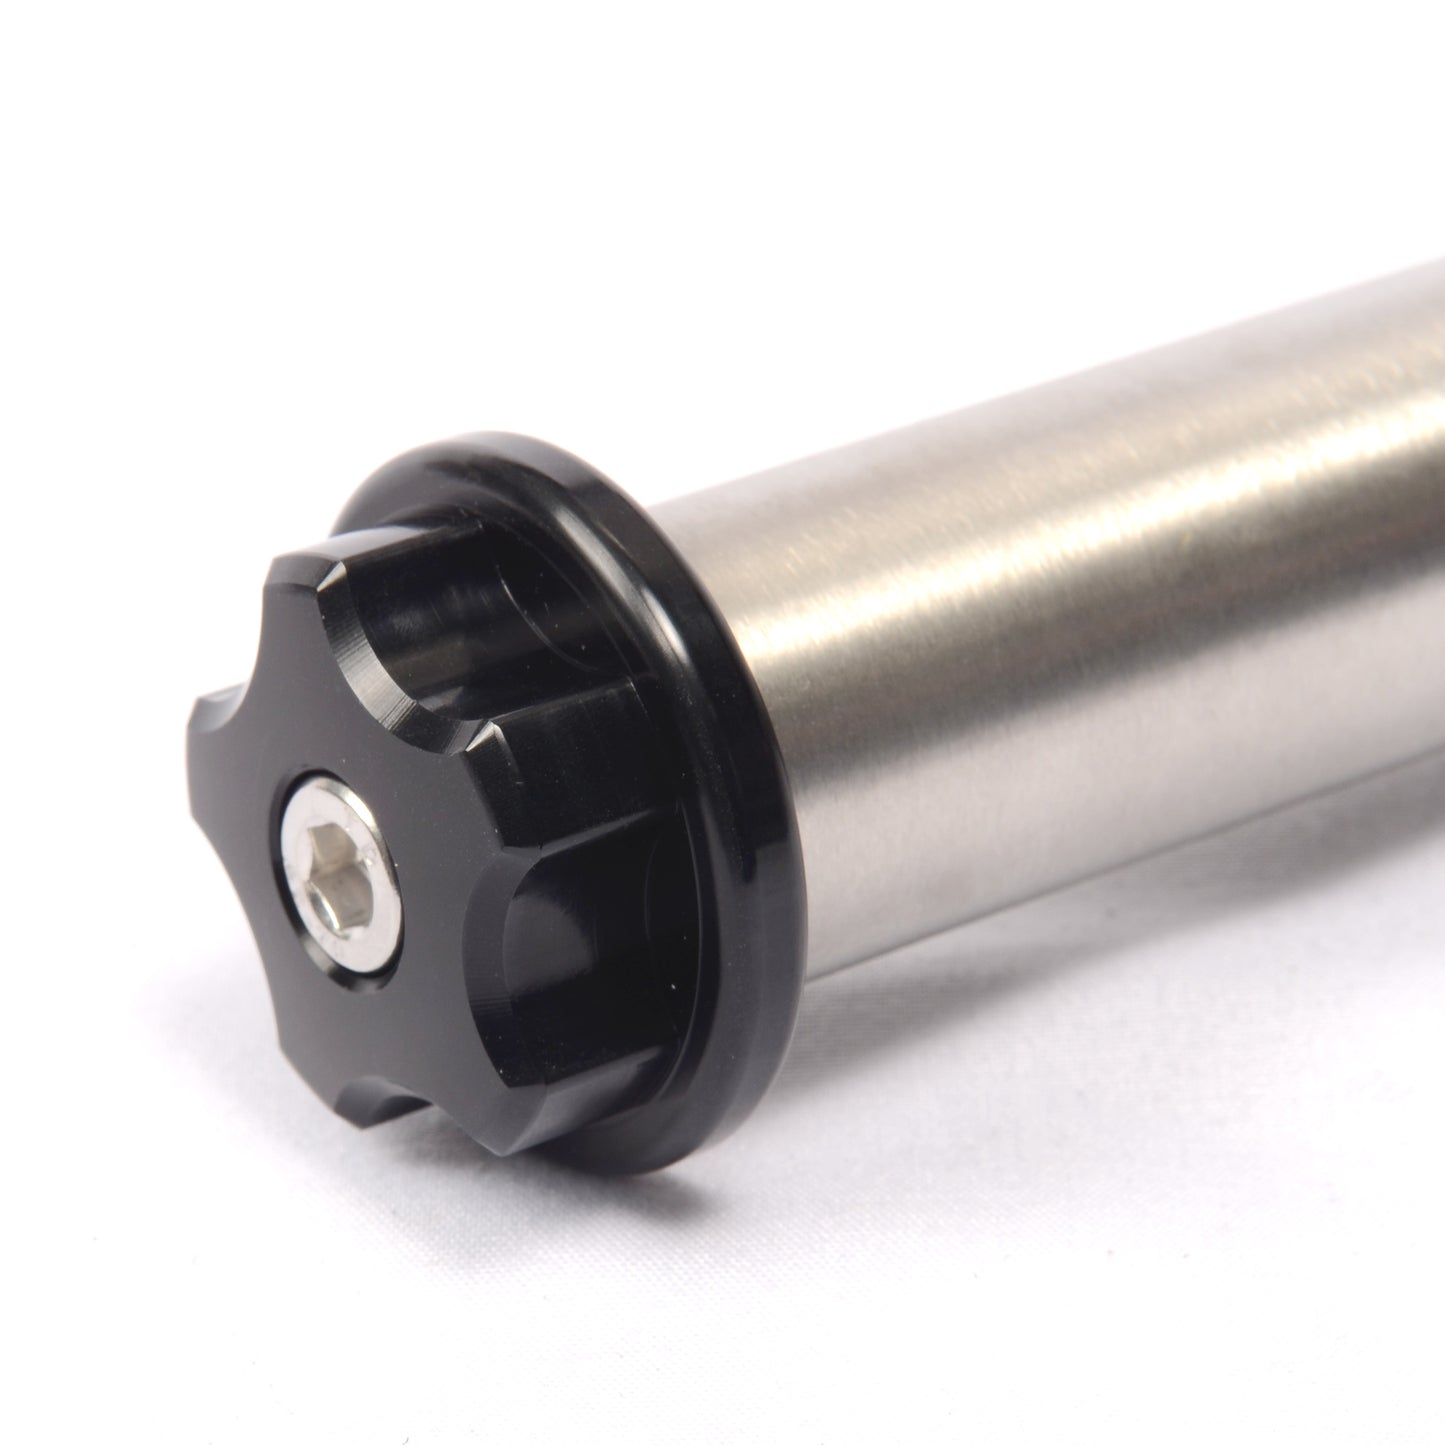 AZ75 25mm Counter Weight Shaft. Includes Mounting Flange